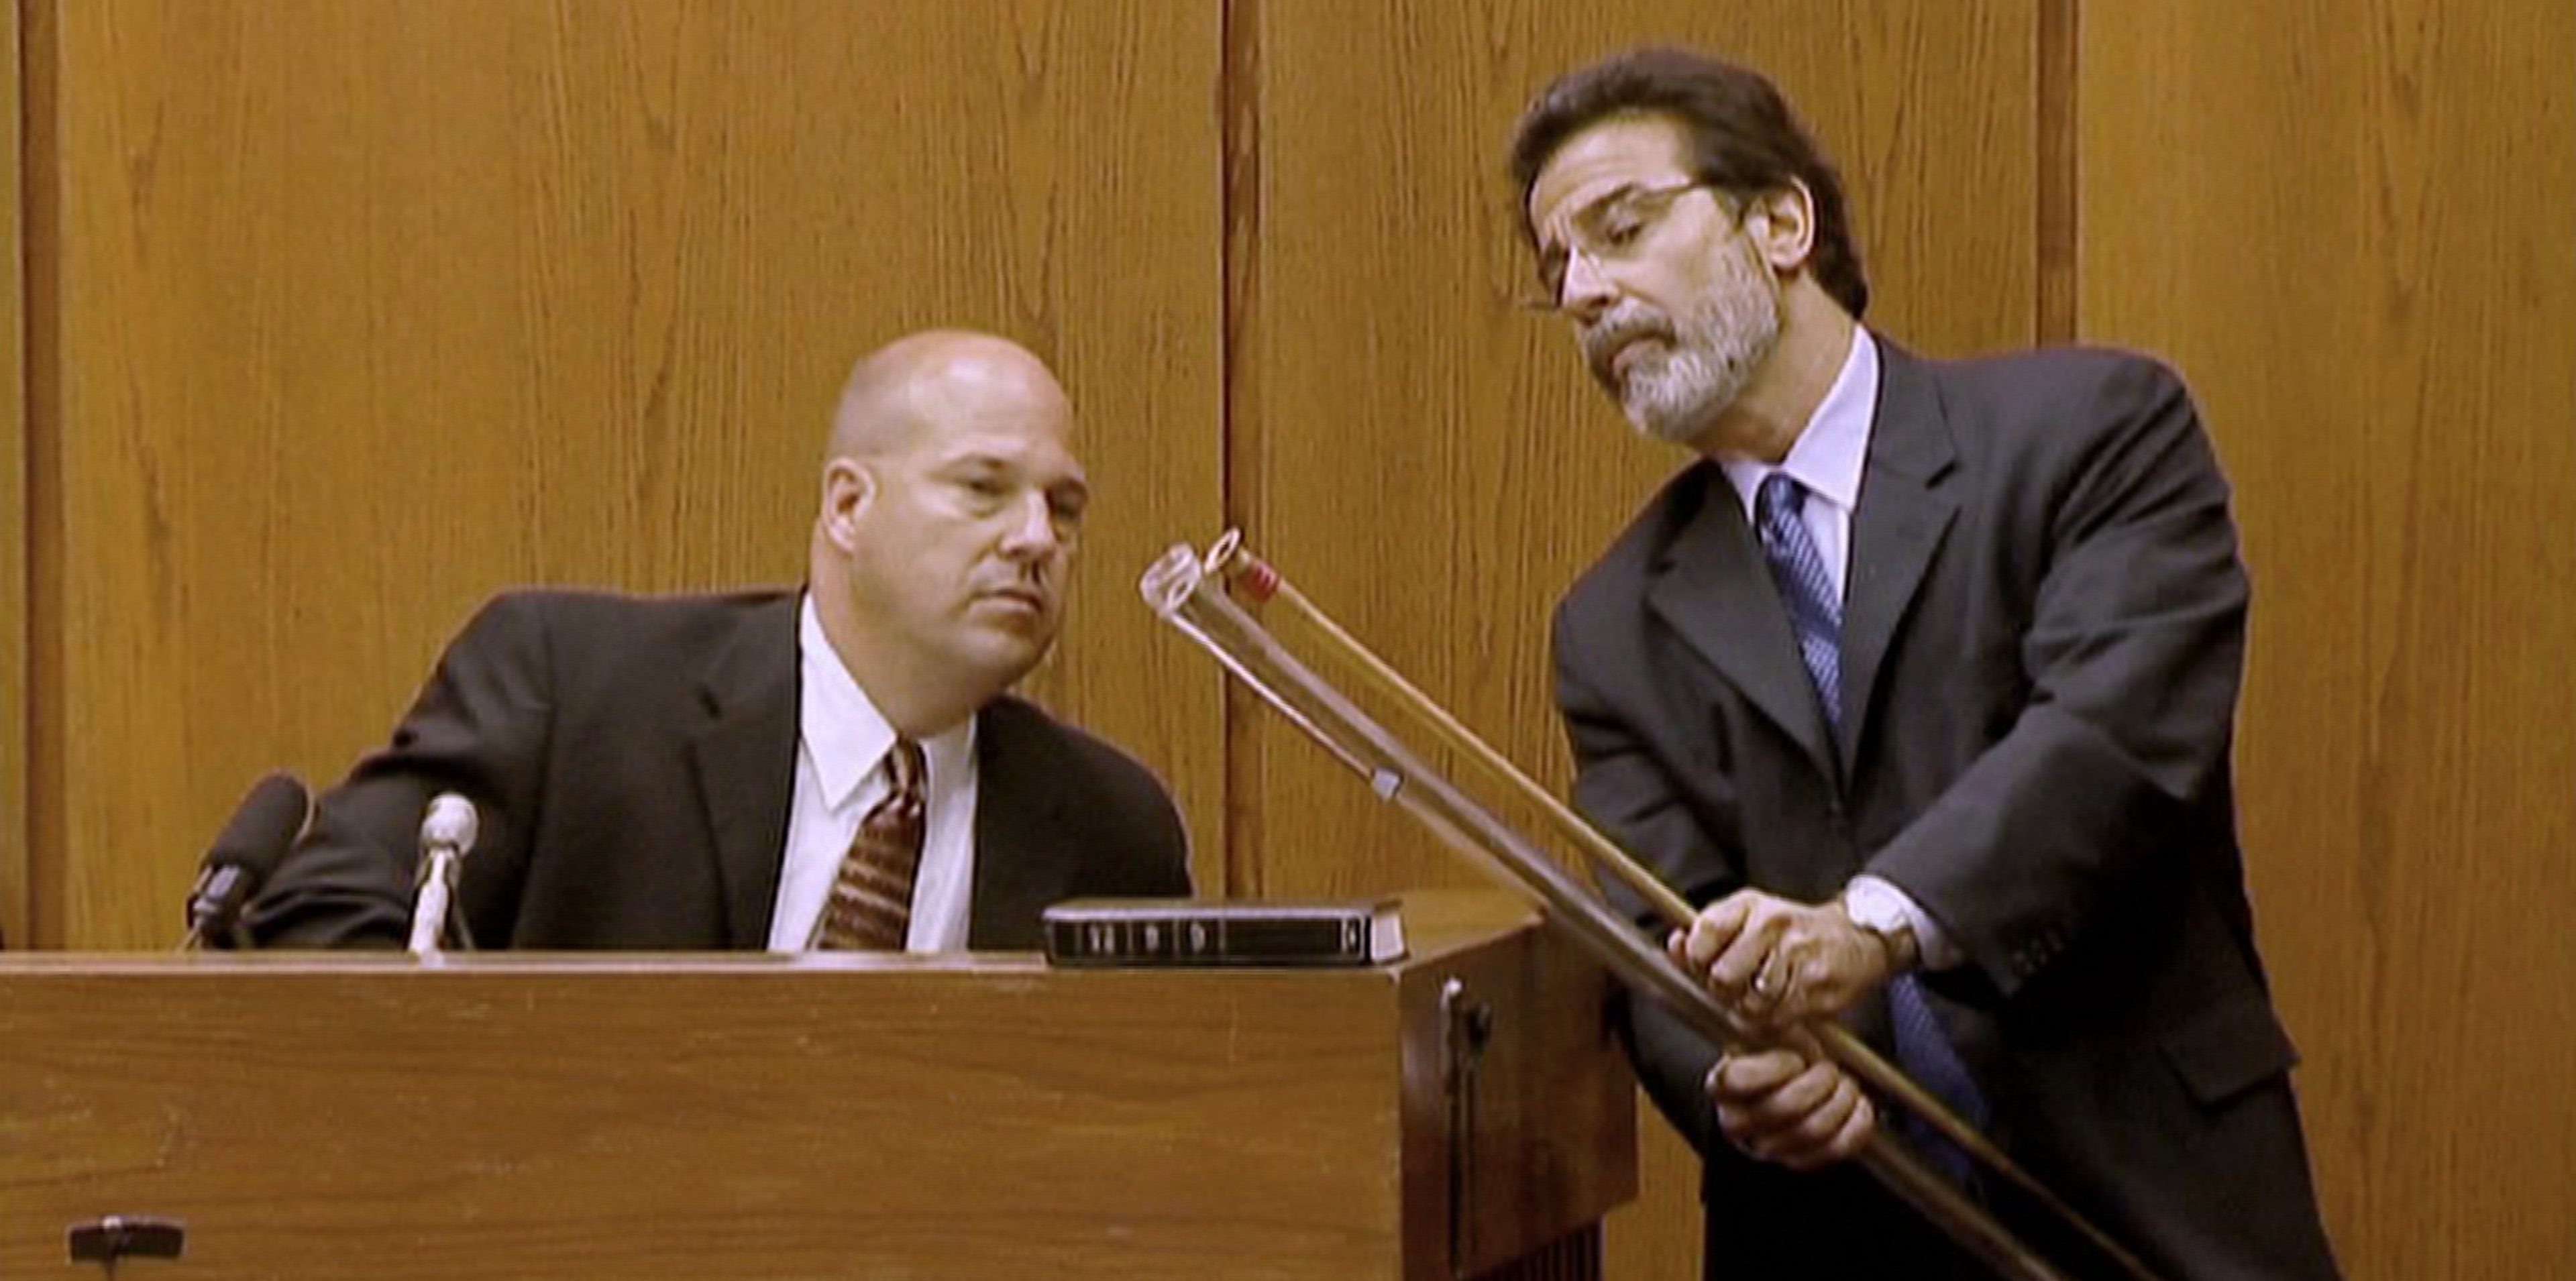 Is David Rudolf a Real Lawyer? Where is He Now?